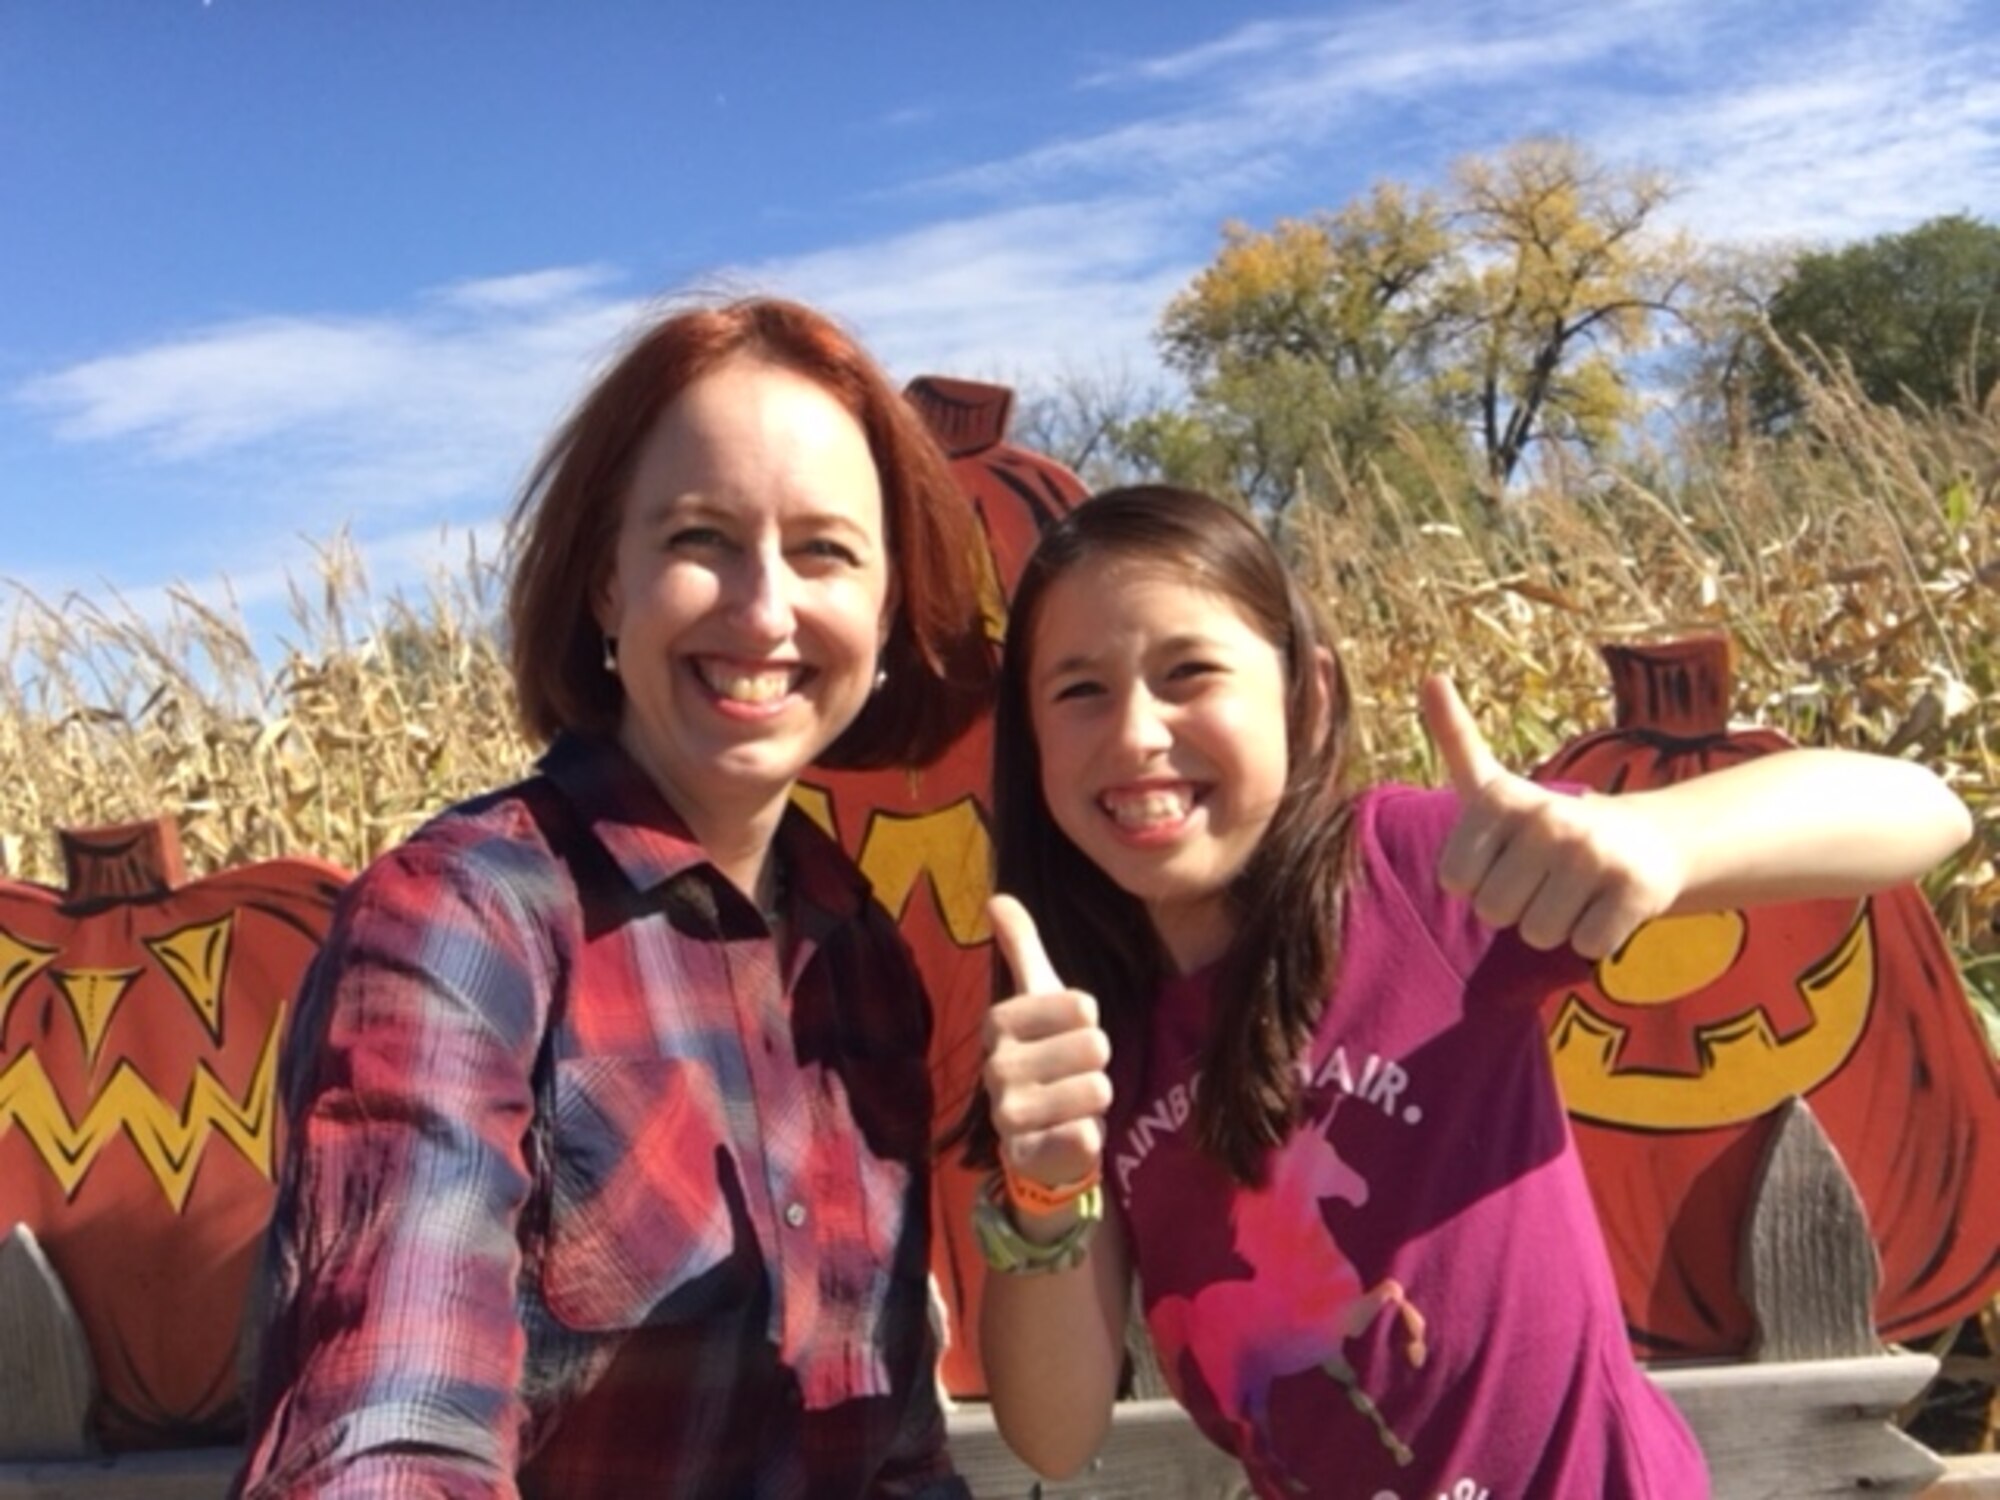 Col. Theresa Medina, 319th Medical Group commander, and her daughter Sophia, pose for a photo at a harvest festival Oct. 7, 2017 at Grand Forks, North Dakota. Medina was diagnosed with stage one breast cancer on Nov. 3, 2011, but with the help of Tricare and the support of family and friends she is now cancer free. (Courtesy photo)